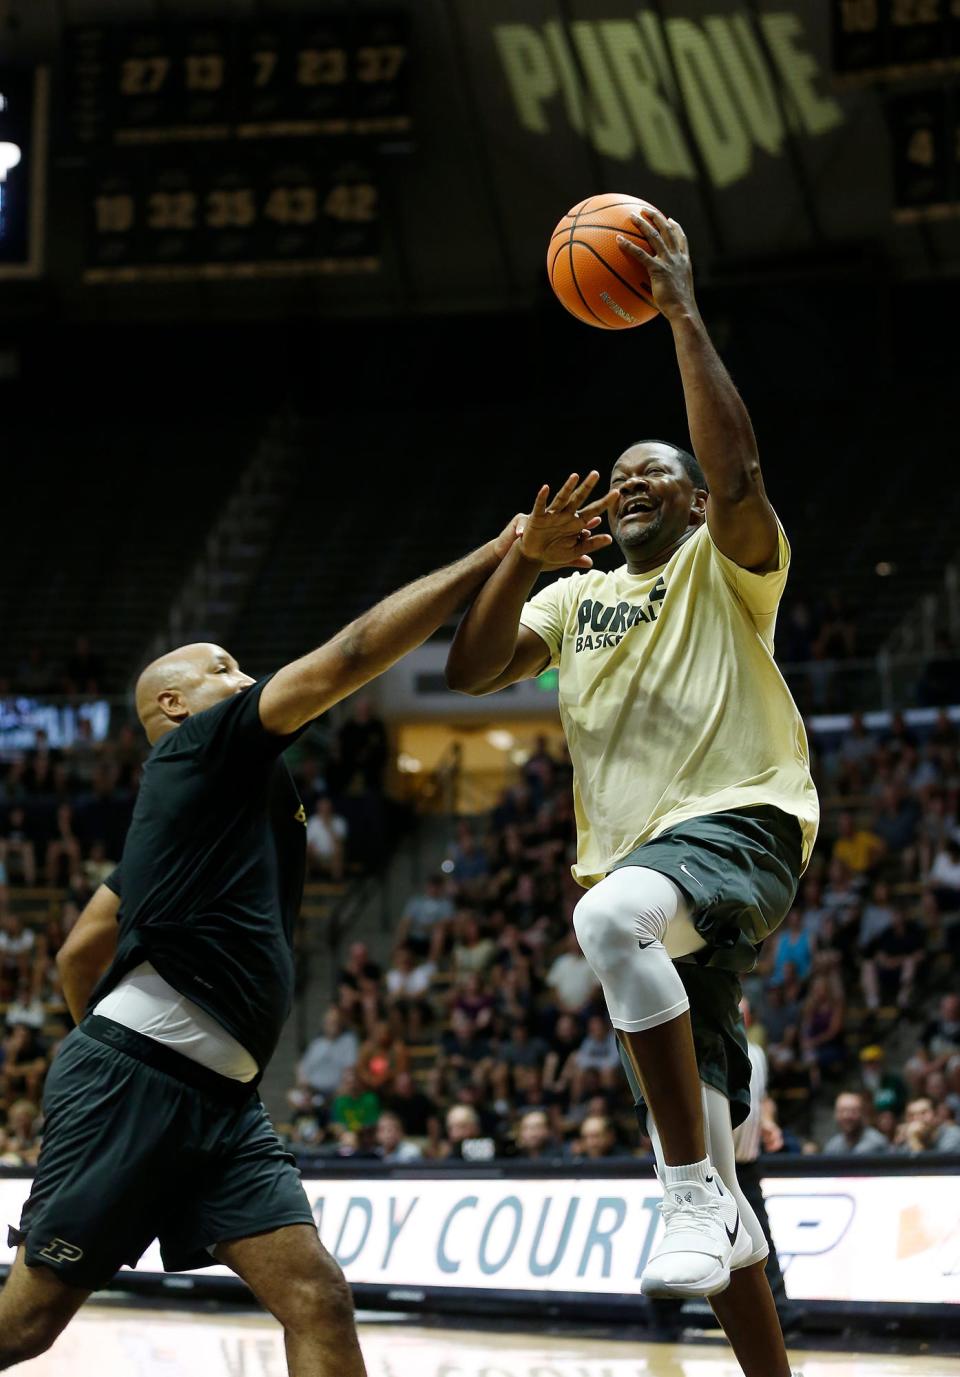 Roy Hairston of the Gold team with a shot over Brandon Brantley of the Black in the Purdue Alumni basketball game Saturday, August 4, 2018, at Mackey Arena. The Black team defeated the Gold 101-91.